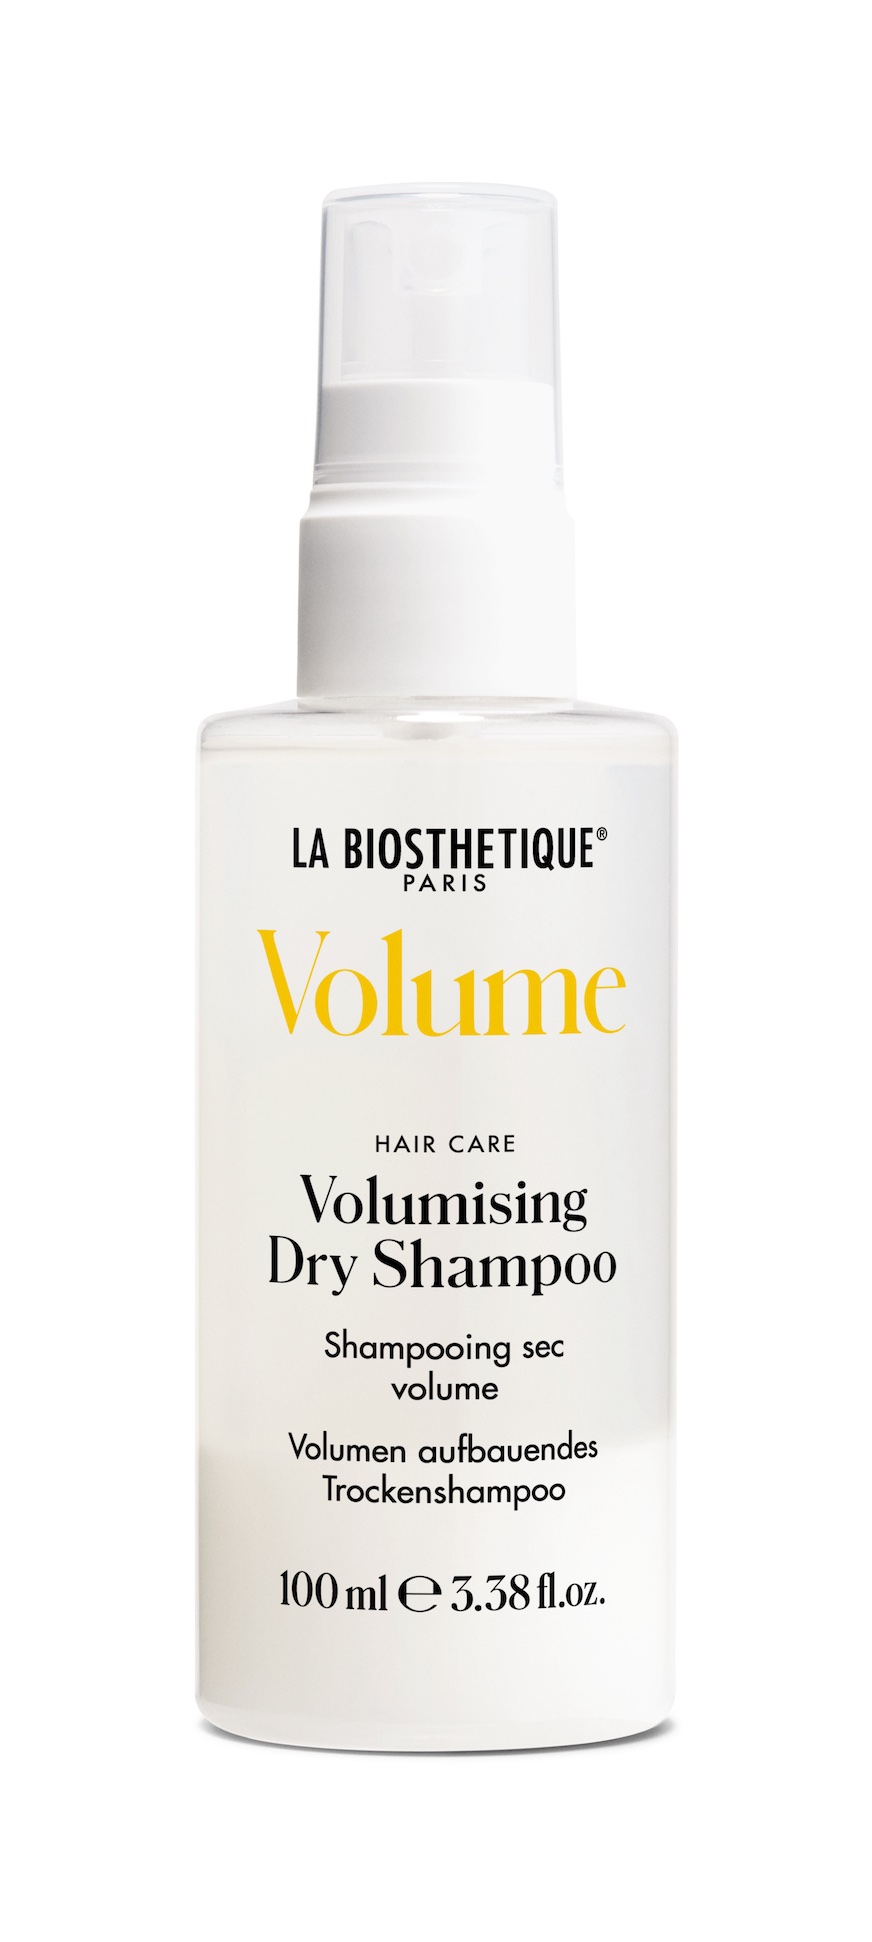 Tested for you: „Volumising Dry Shampoo“ from La Biosthetique | Culture And  Cream